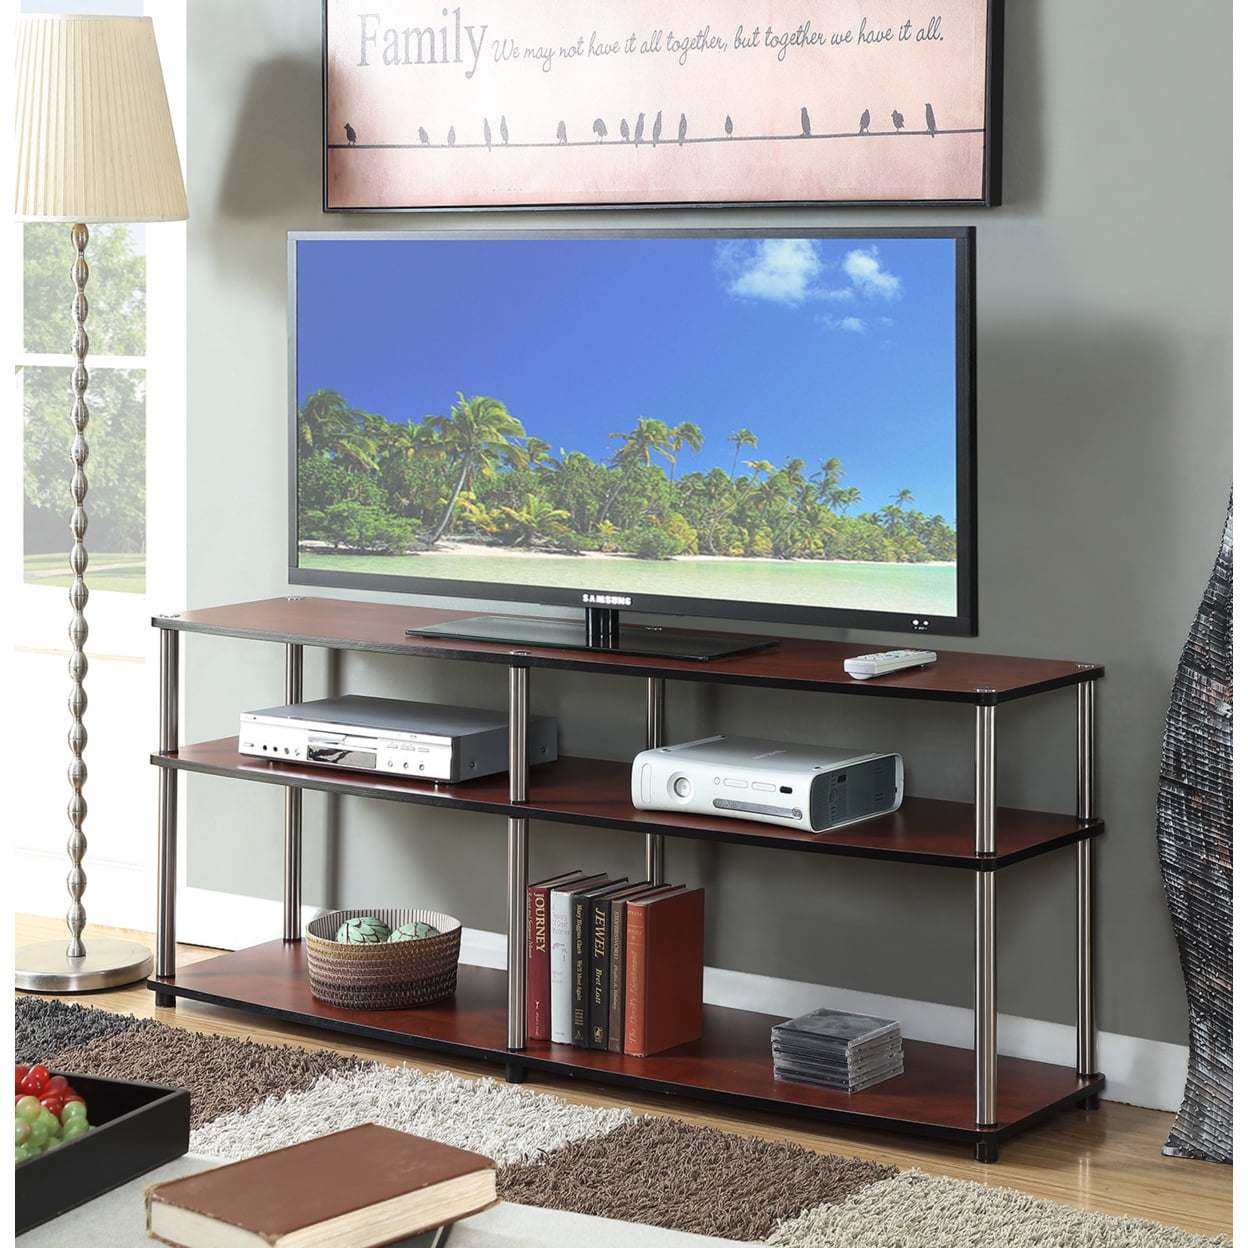 131060ch 3 Tier 60 In. Tv Stand, Cherry - 59 X 15.75 X 24 In.